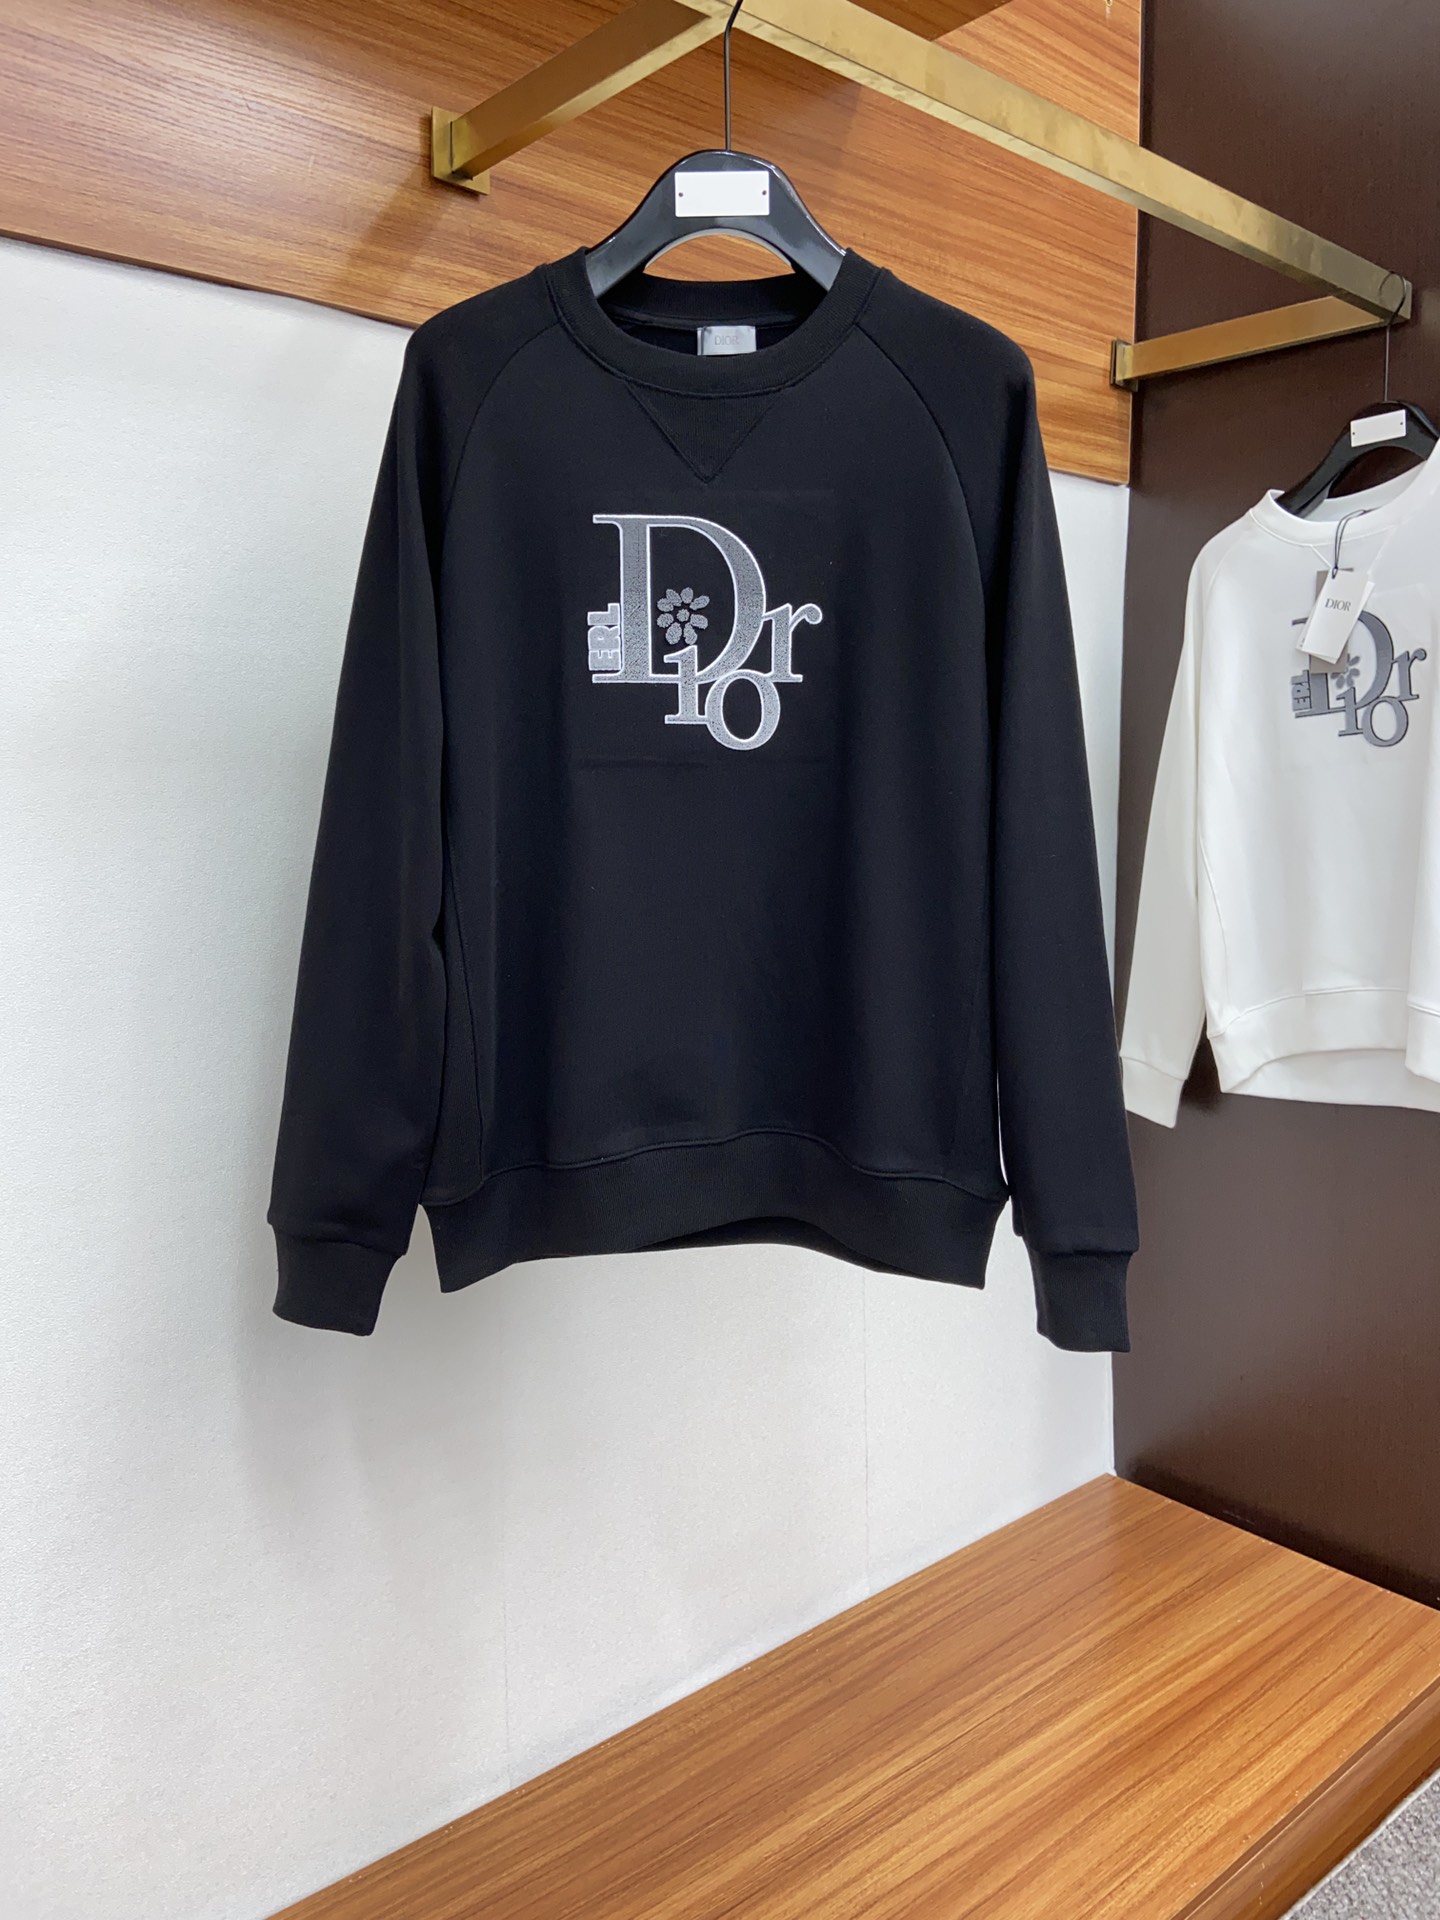 website to buy replica
 Dior 7 Star
 Clothing Knit Sweater Sweatshirts Black White Embroidery Knitting Fall/Winter Collection Casual